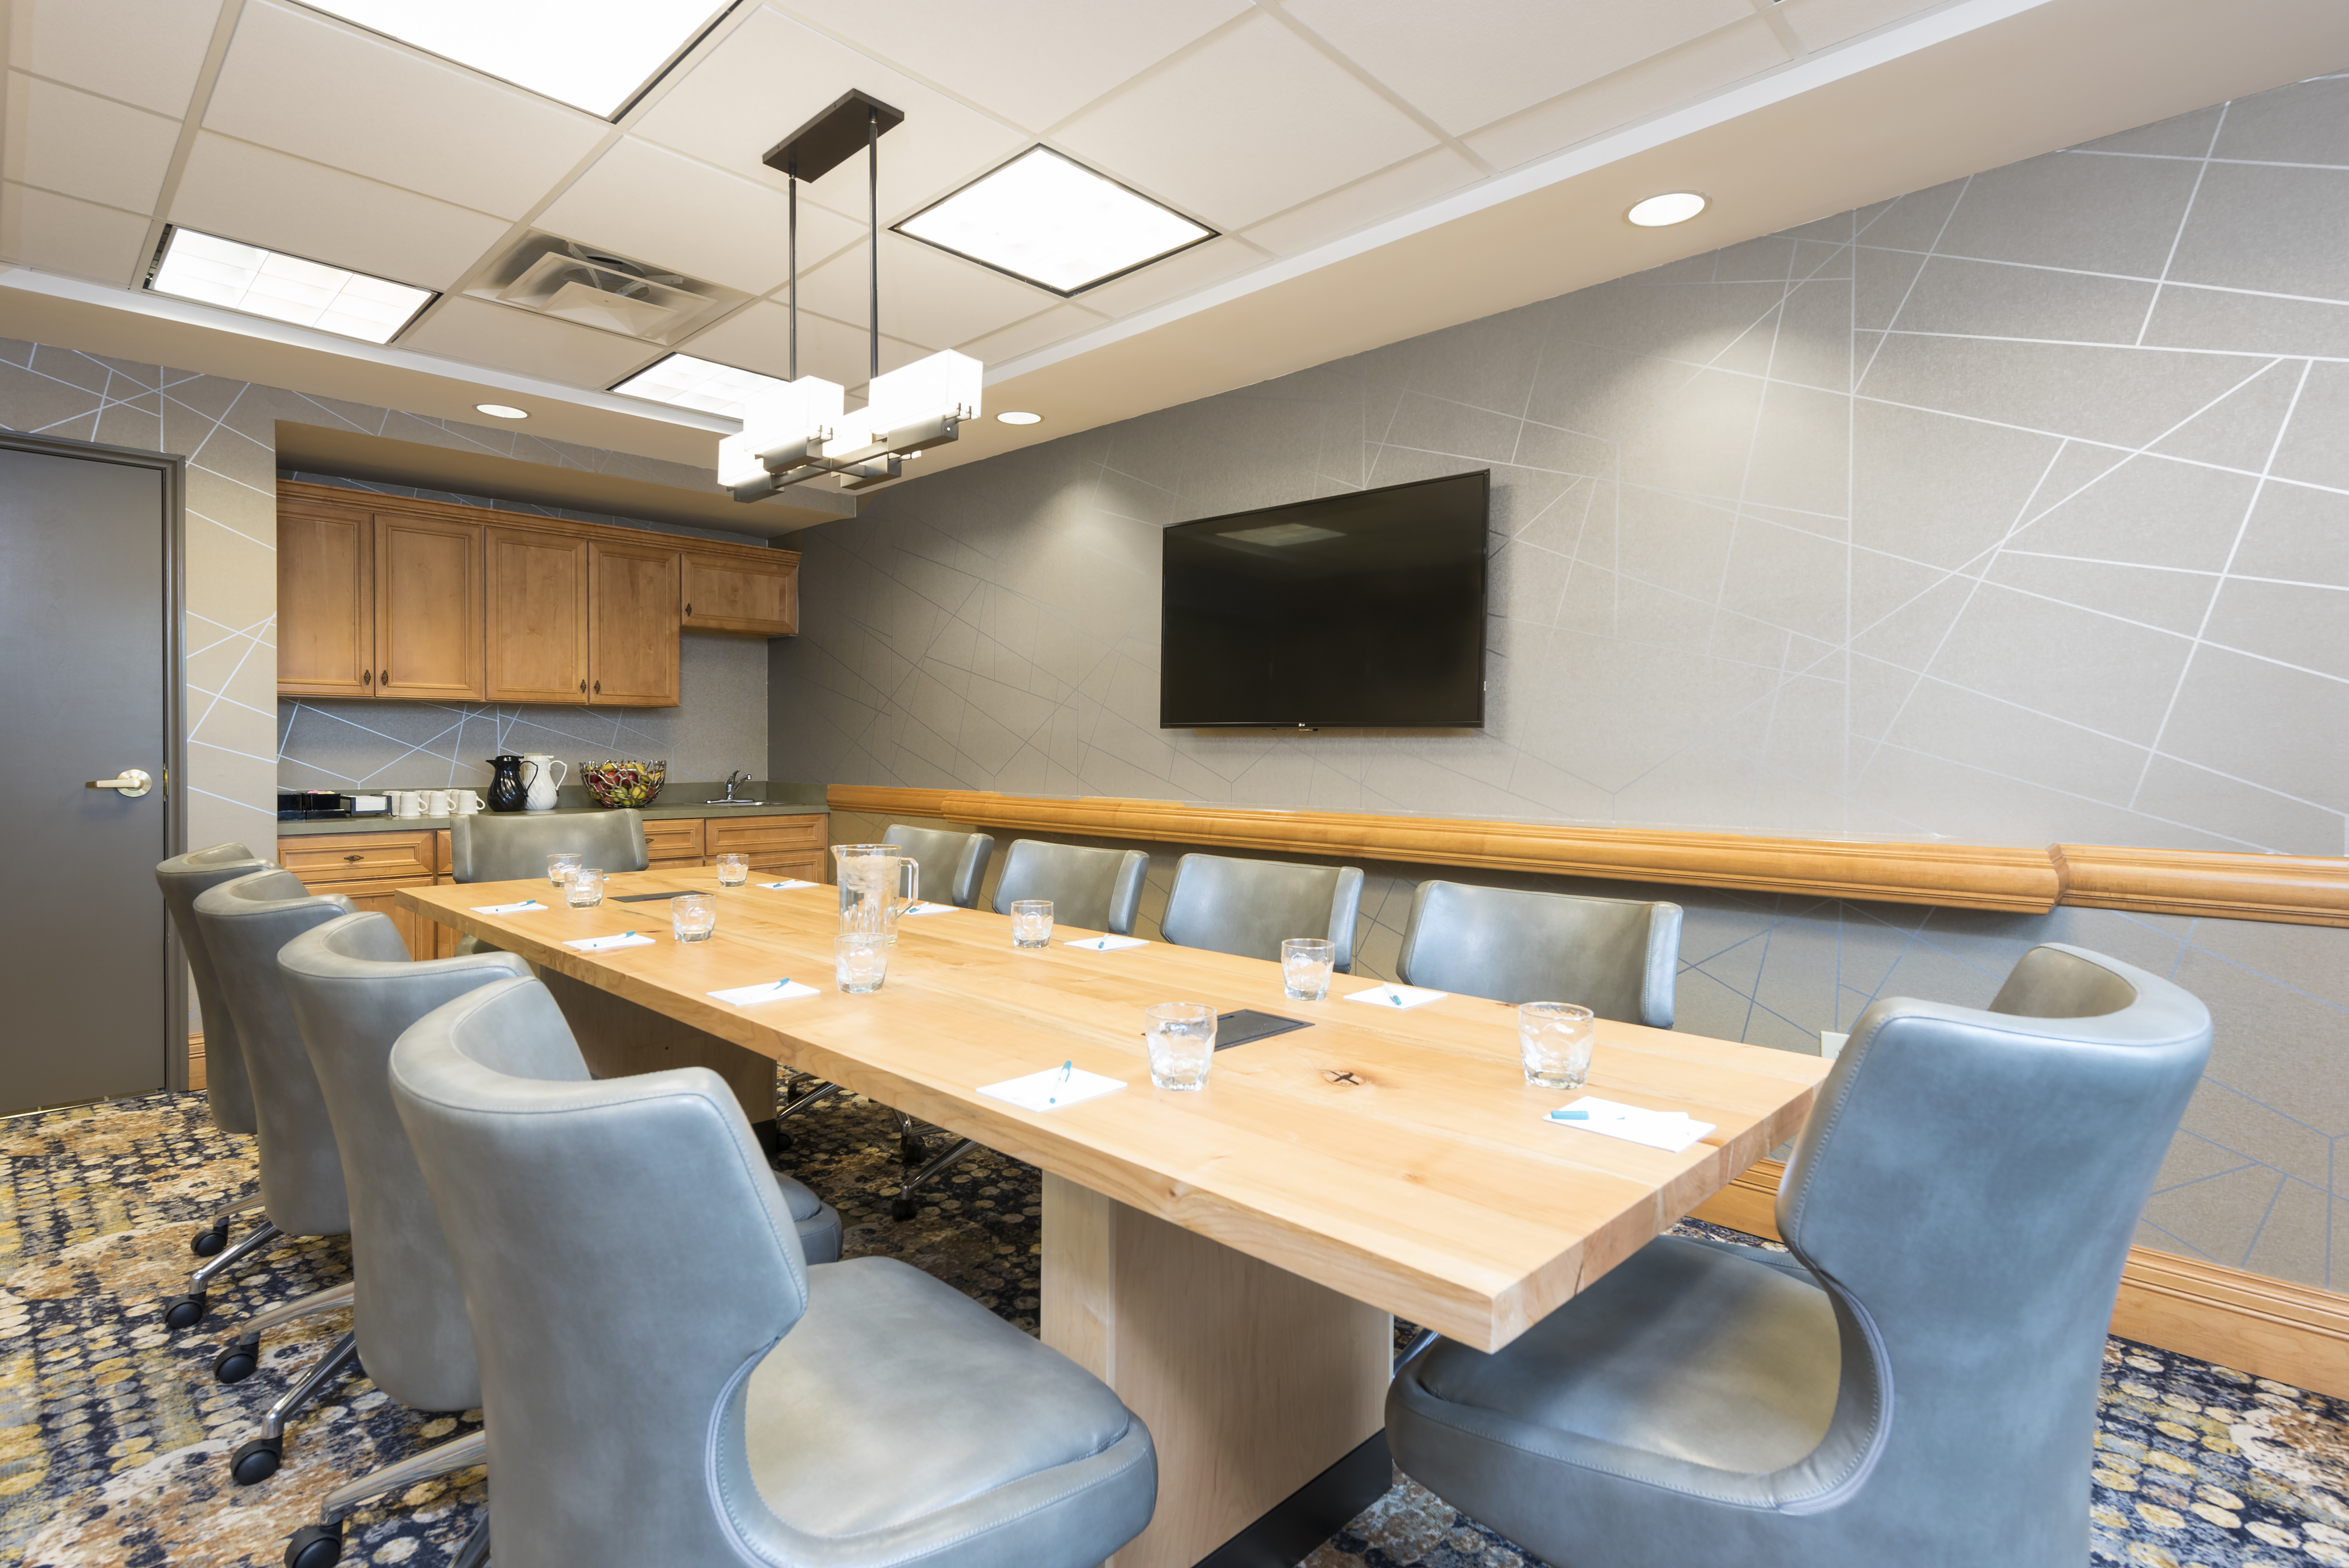 Meeting room with boardroom table